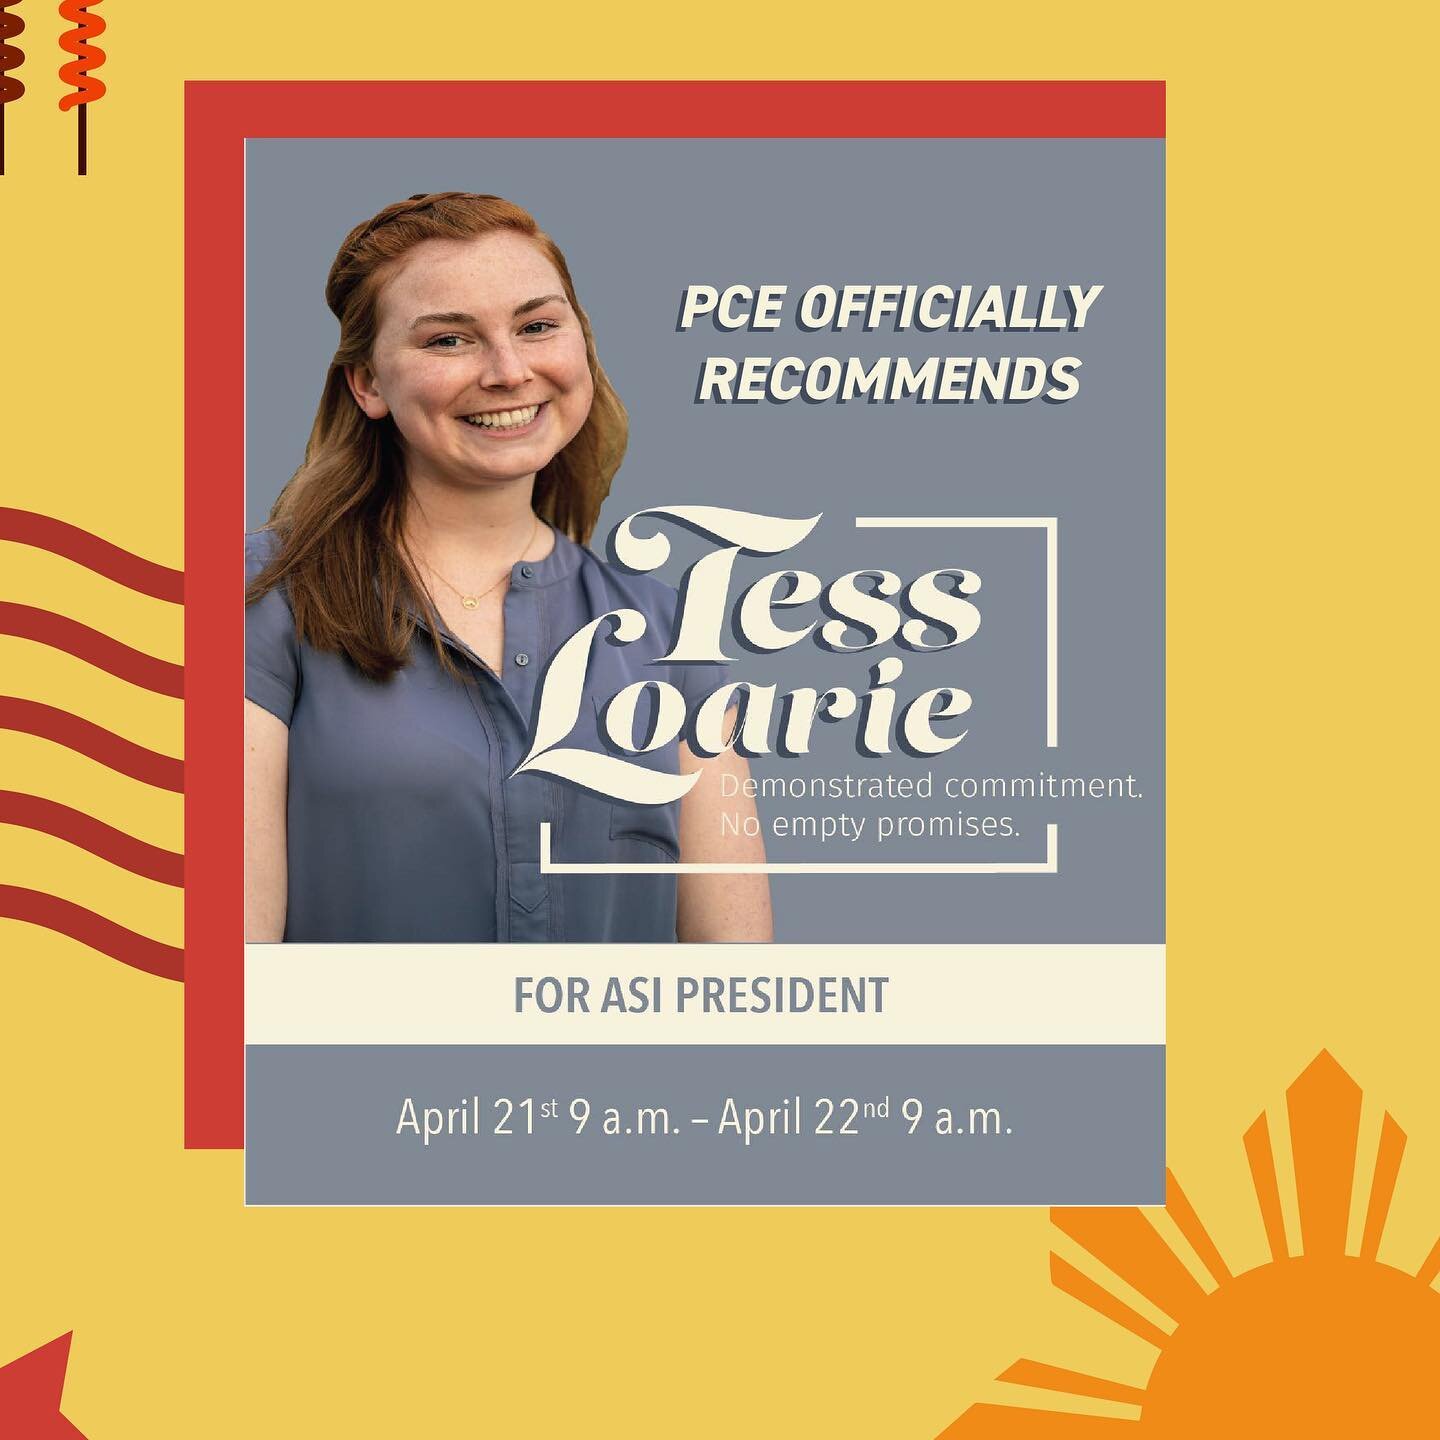 PCE has collectively voted to endorse Tess Loarie (@tessloarie) for ASI President. ASI Elections start TODAY, Wednesday April 21 9 AM through Thursday April 22 9 AM. We encourage all PCE members to actively take part in change on campus by participat